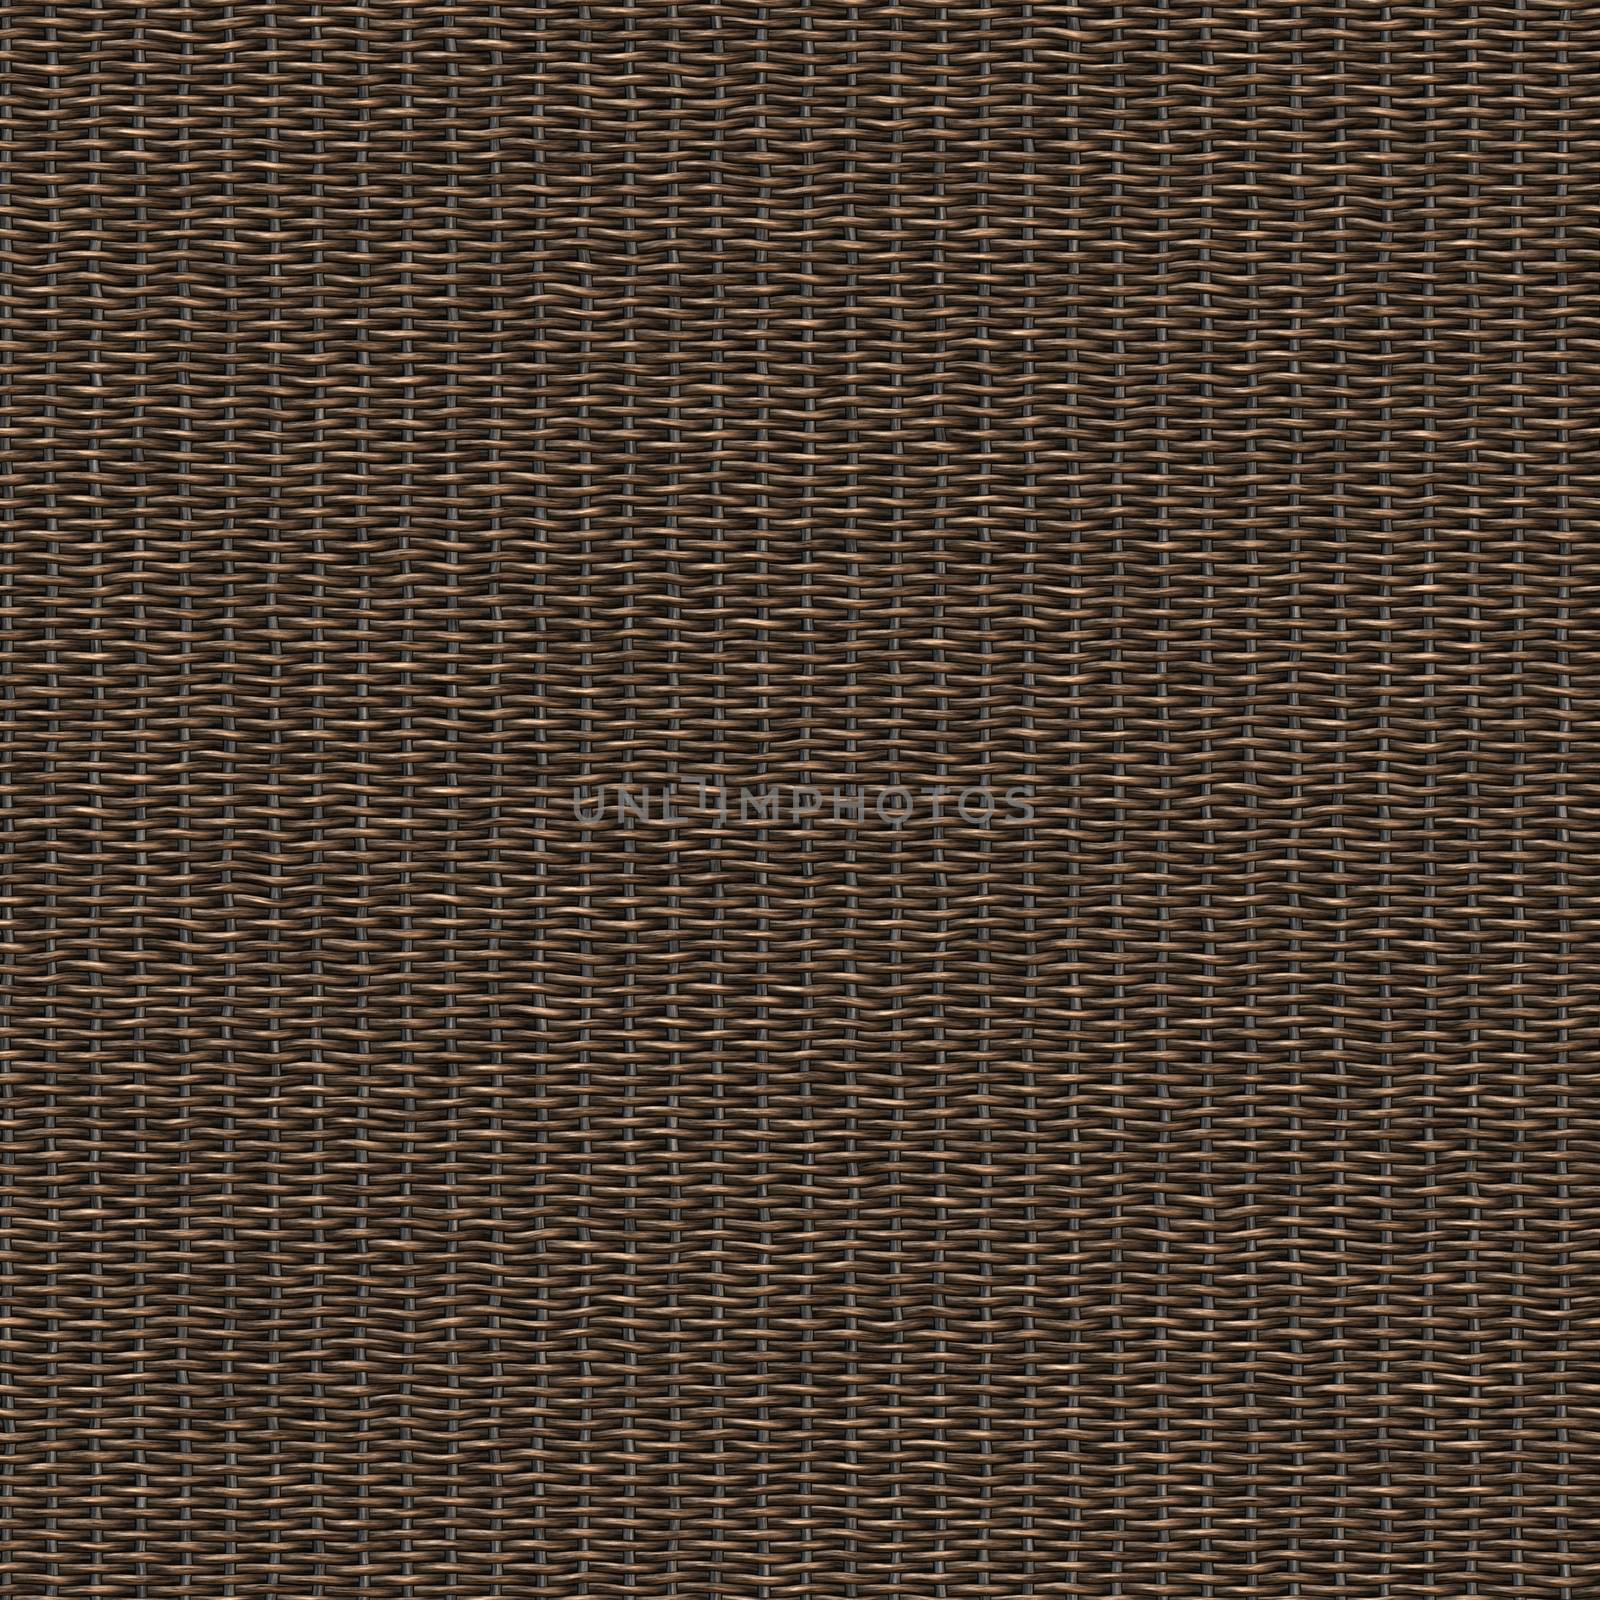 Natural Wicker Horizontal Background Or Texture, Close Up, Copy Space. Seamless pattern design by skrotov